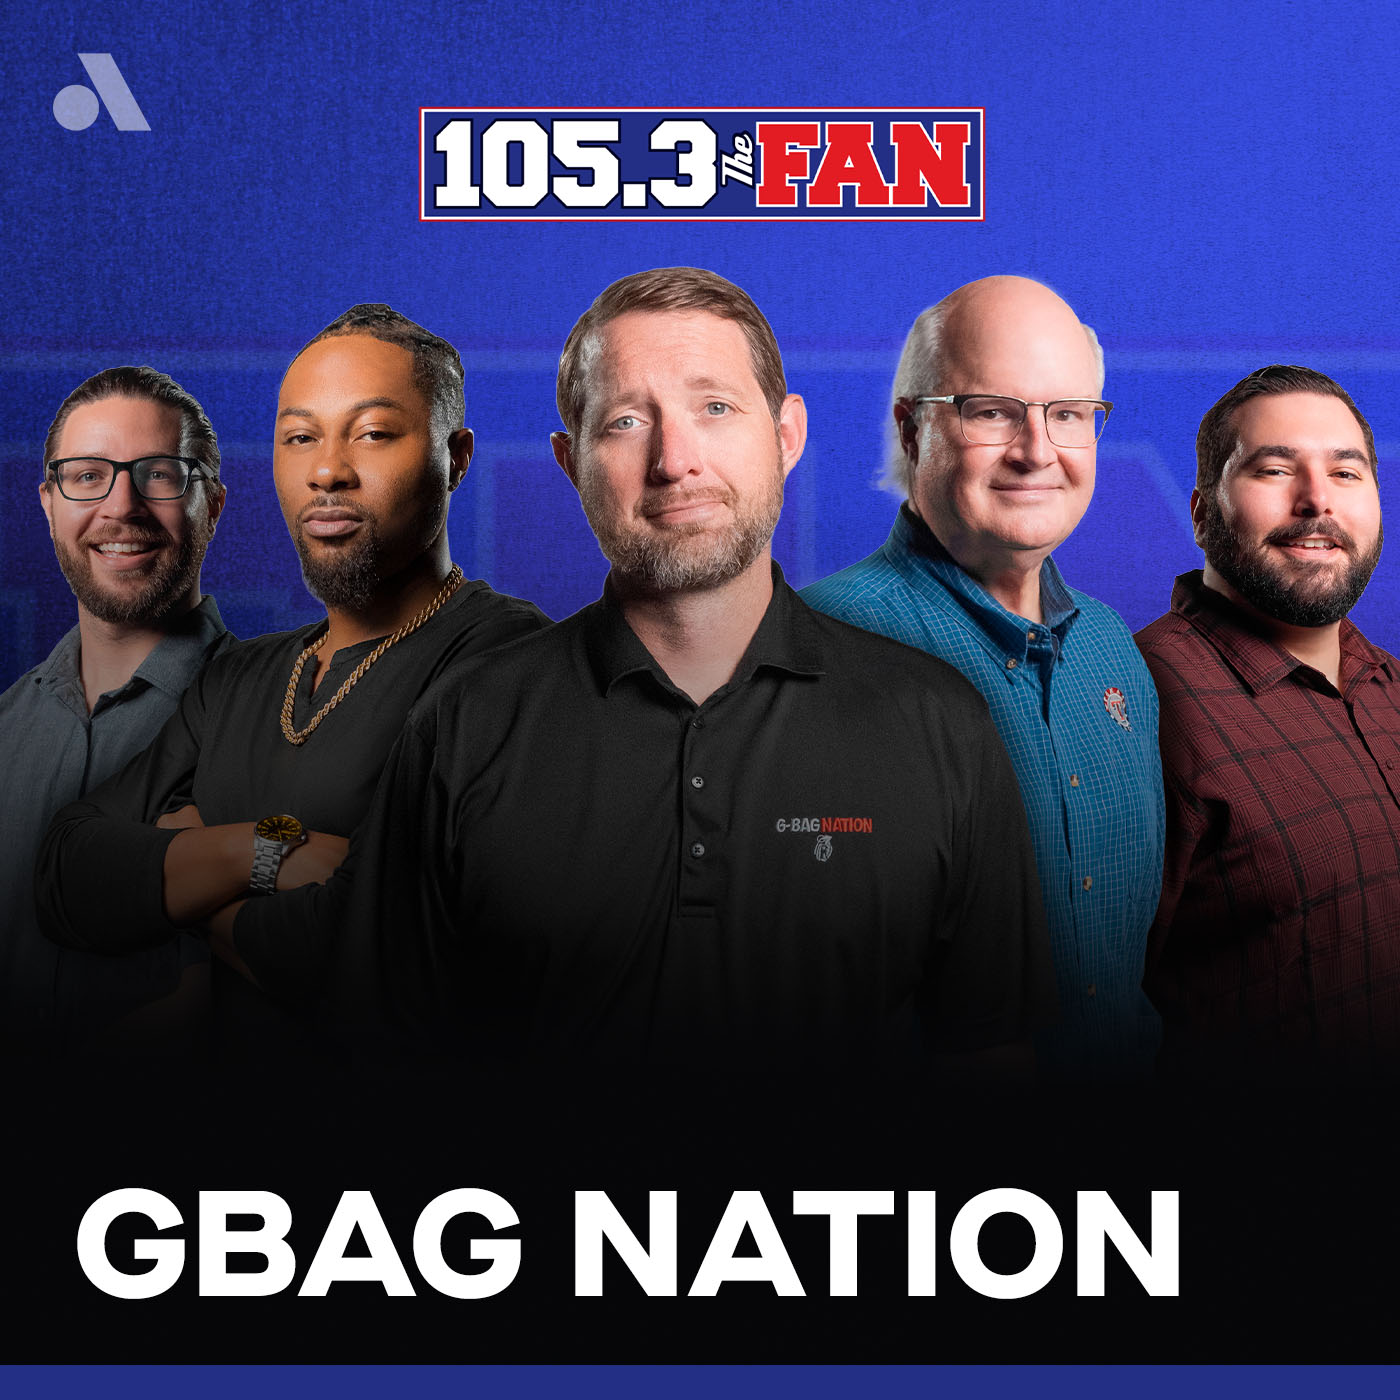 The G-Bag Nation reacts to Pete Prisco's Top100 NFL Players: How many Cowboys on the list